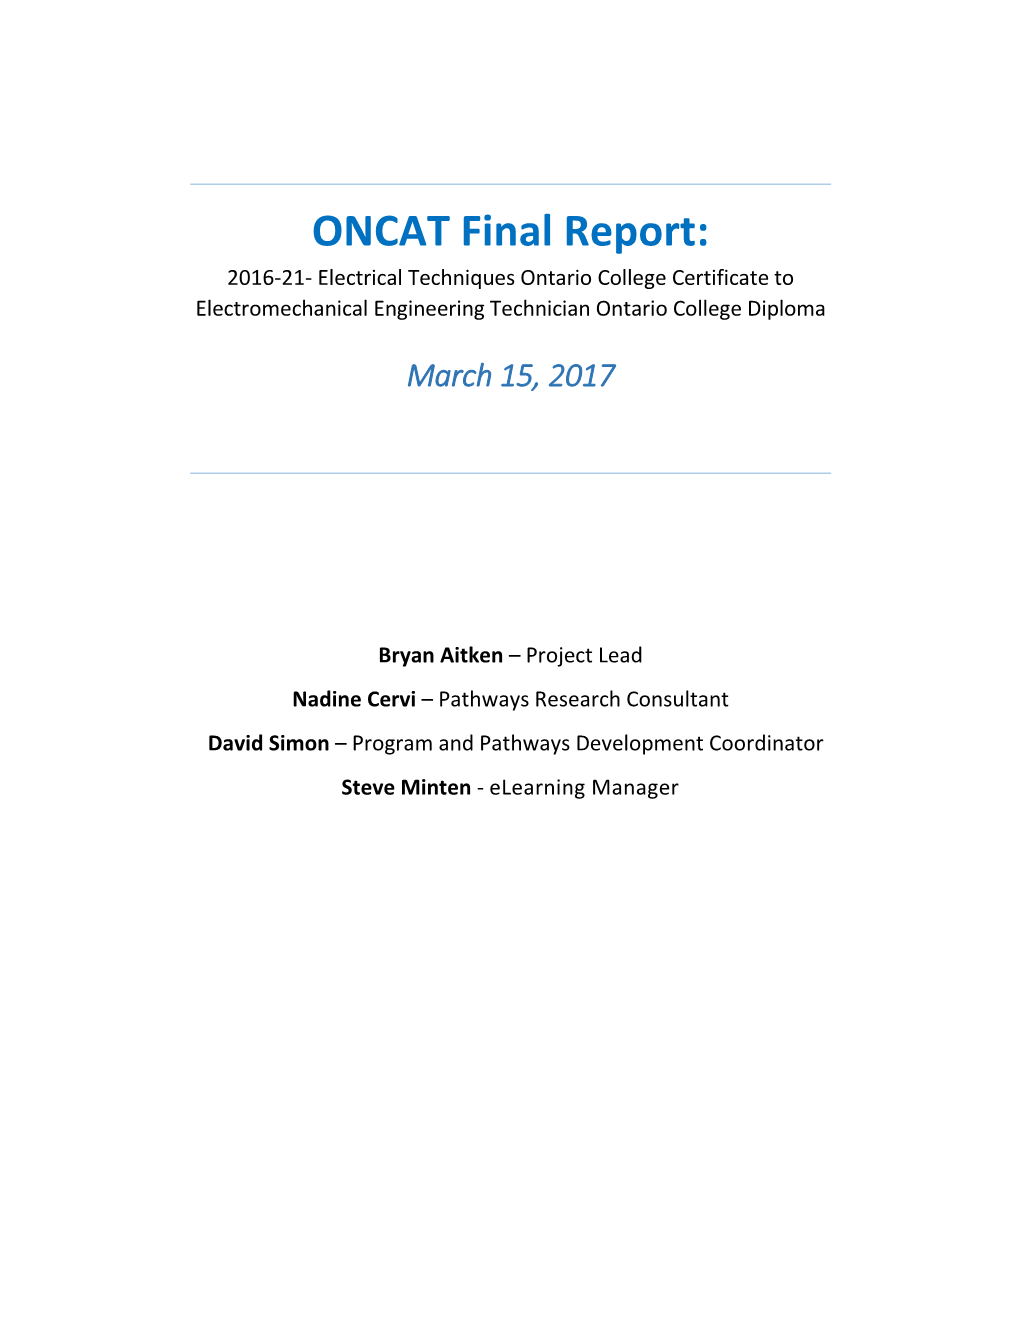 ONCAT Final Report: 2016-21- Electrical Techniques Ontario College Certificate to Electromechanical Engineering Technician Ontario College Diploma